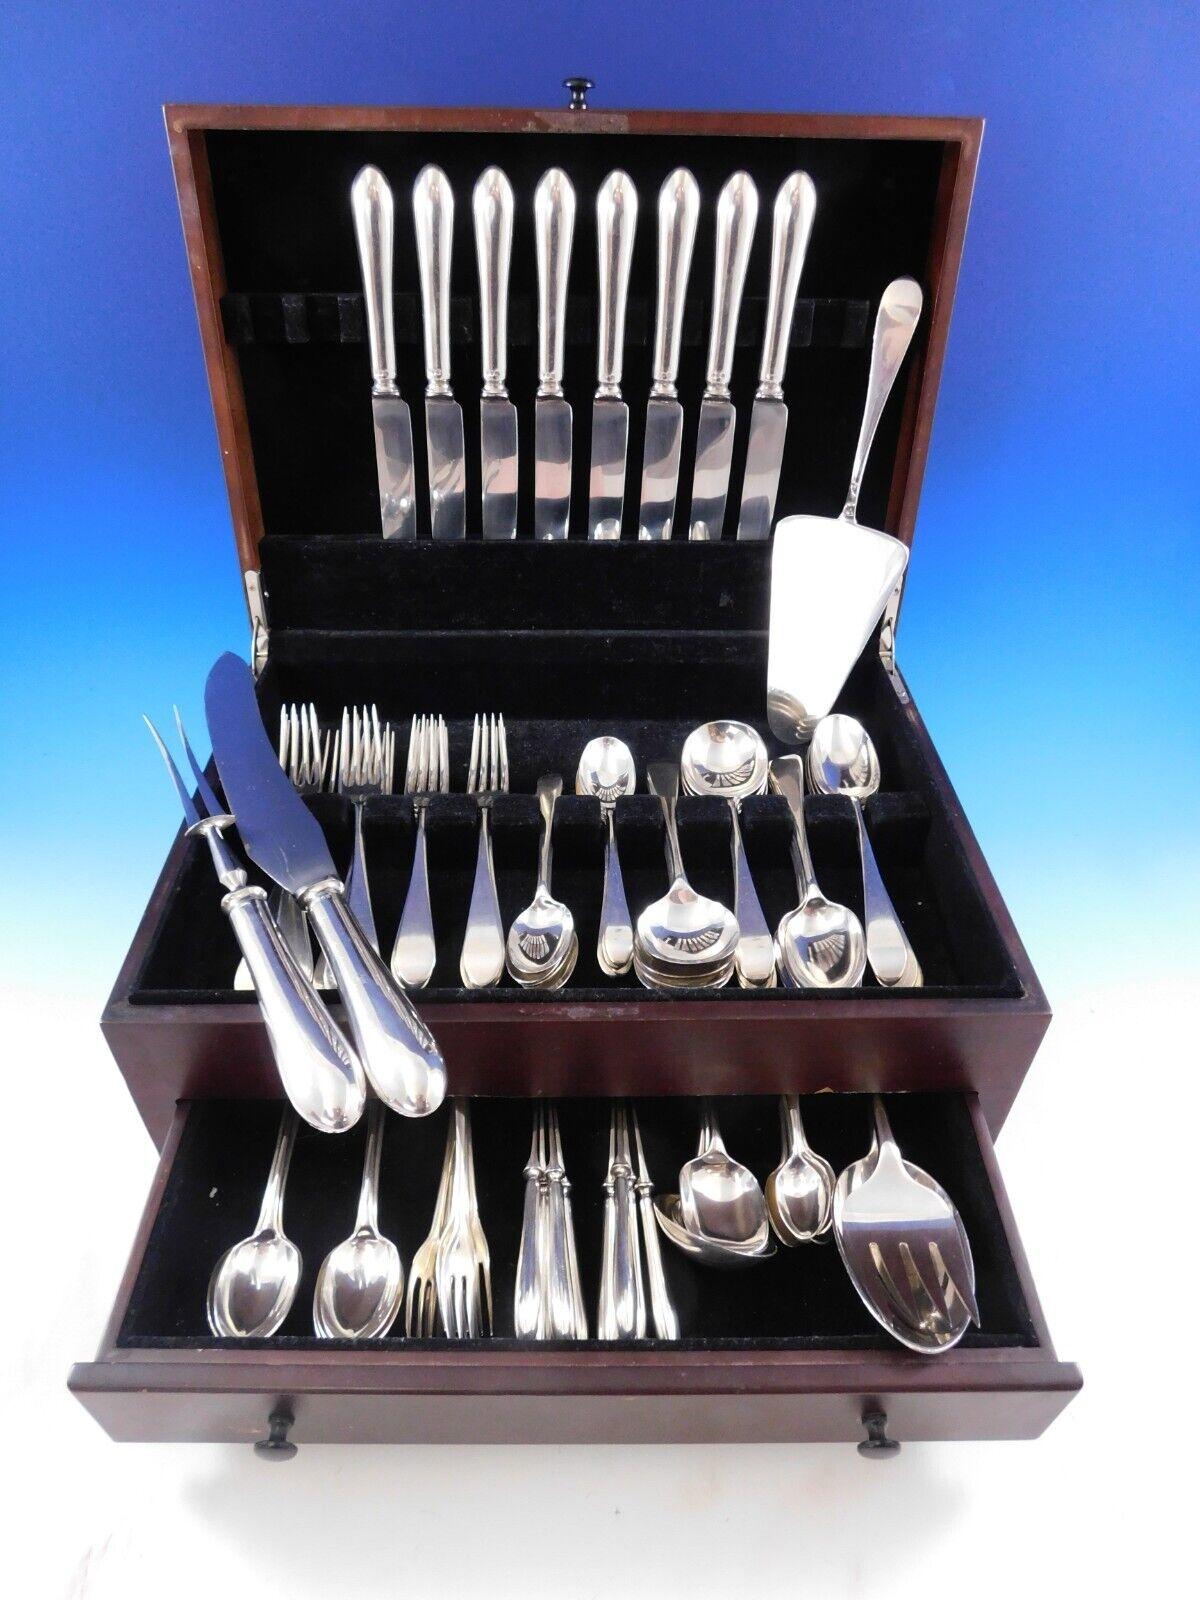 Irish rib bY James Robinson

For 70 years, James Robinson has been selling exquisite handmade sterling silver flatware in Sheffield, England. Today, the silver is still made in the traditional way. They start with a rectangular strip of silver,